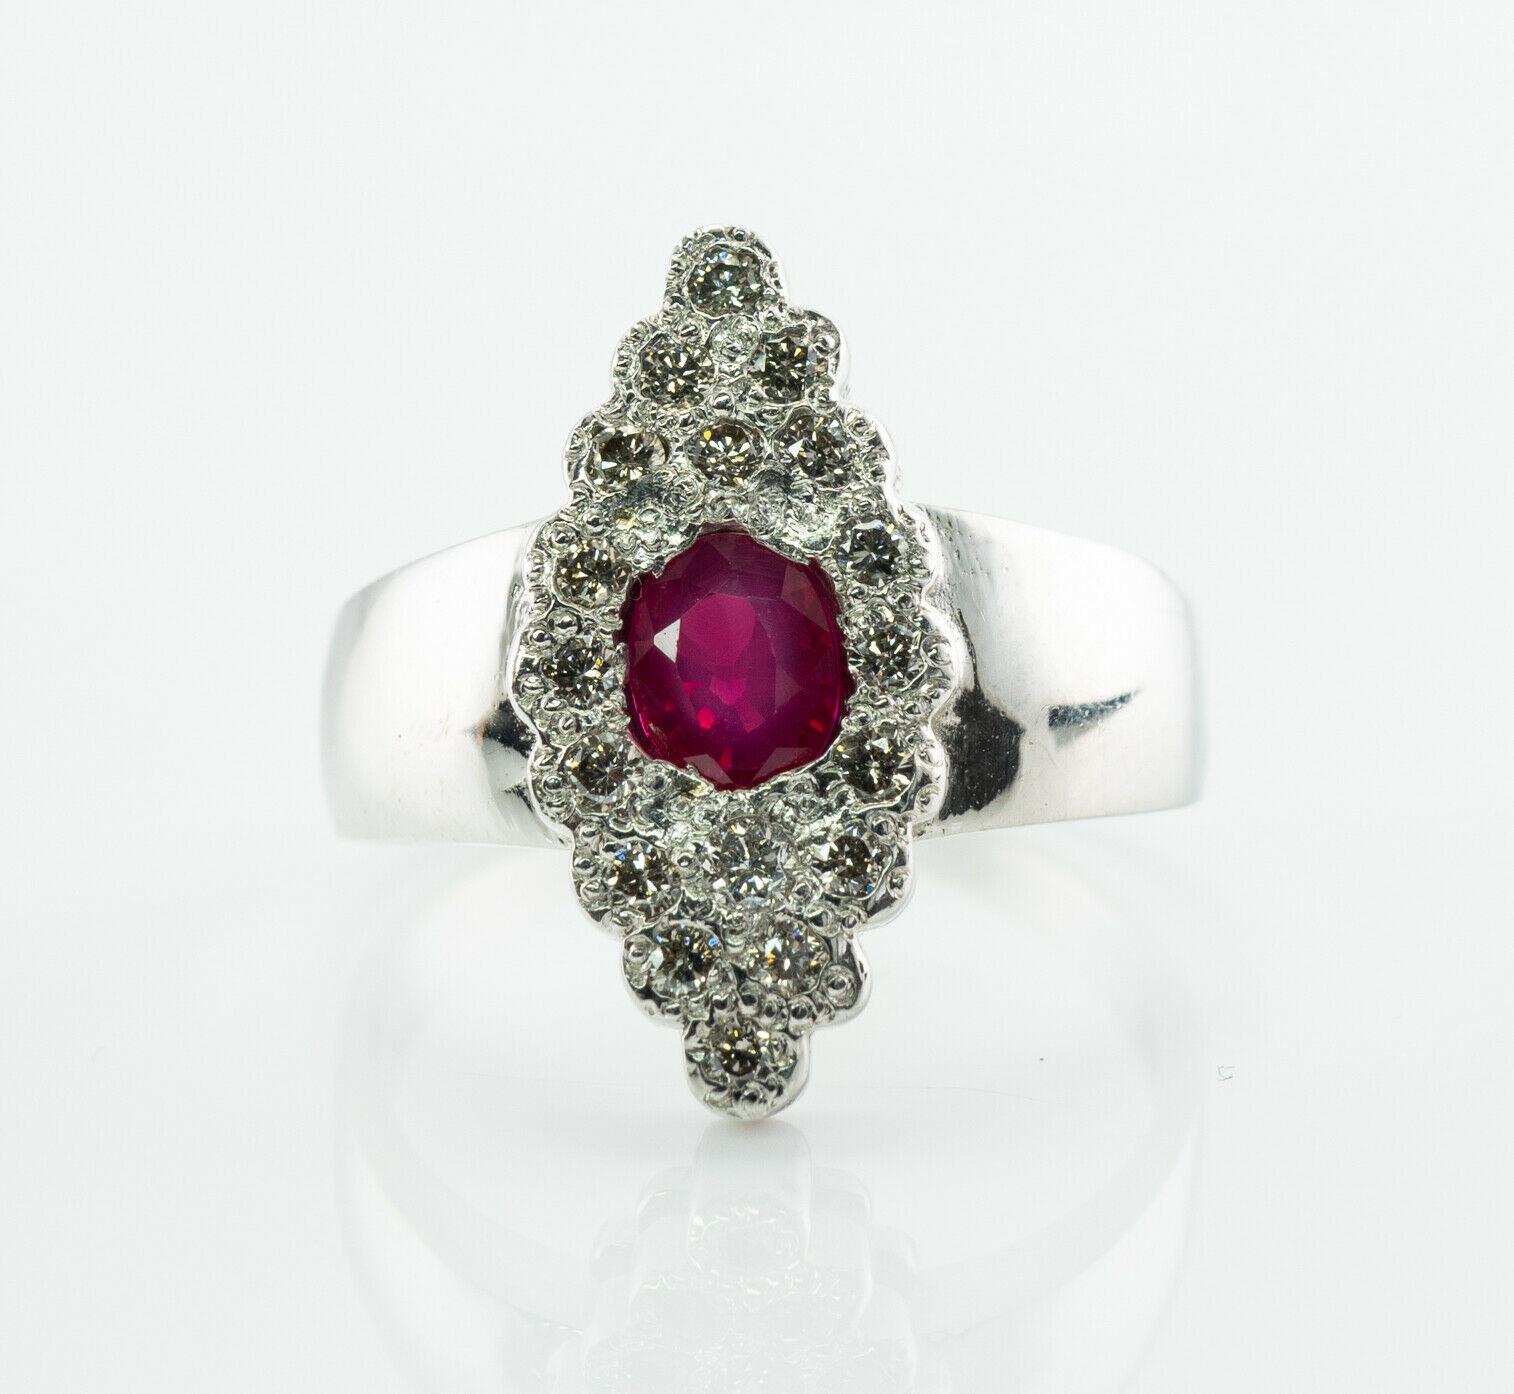 This absolutely stunning vintage ring is finely crafted in solid 14K White gold and set with Natural Earth-mined Ruby and diamonds. The center red Ruby measures 5mm x 4mm (.52 carat) and this is a very clean and transparent gem of great intensity